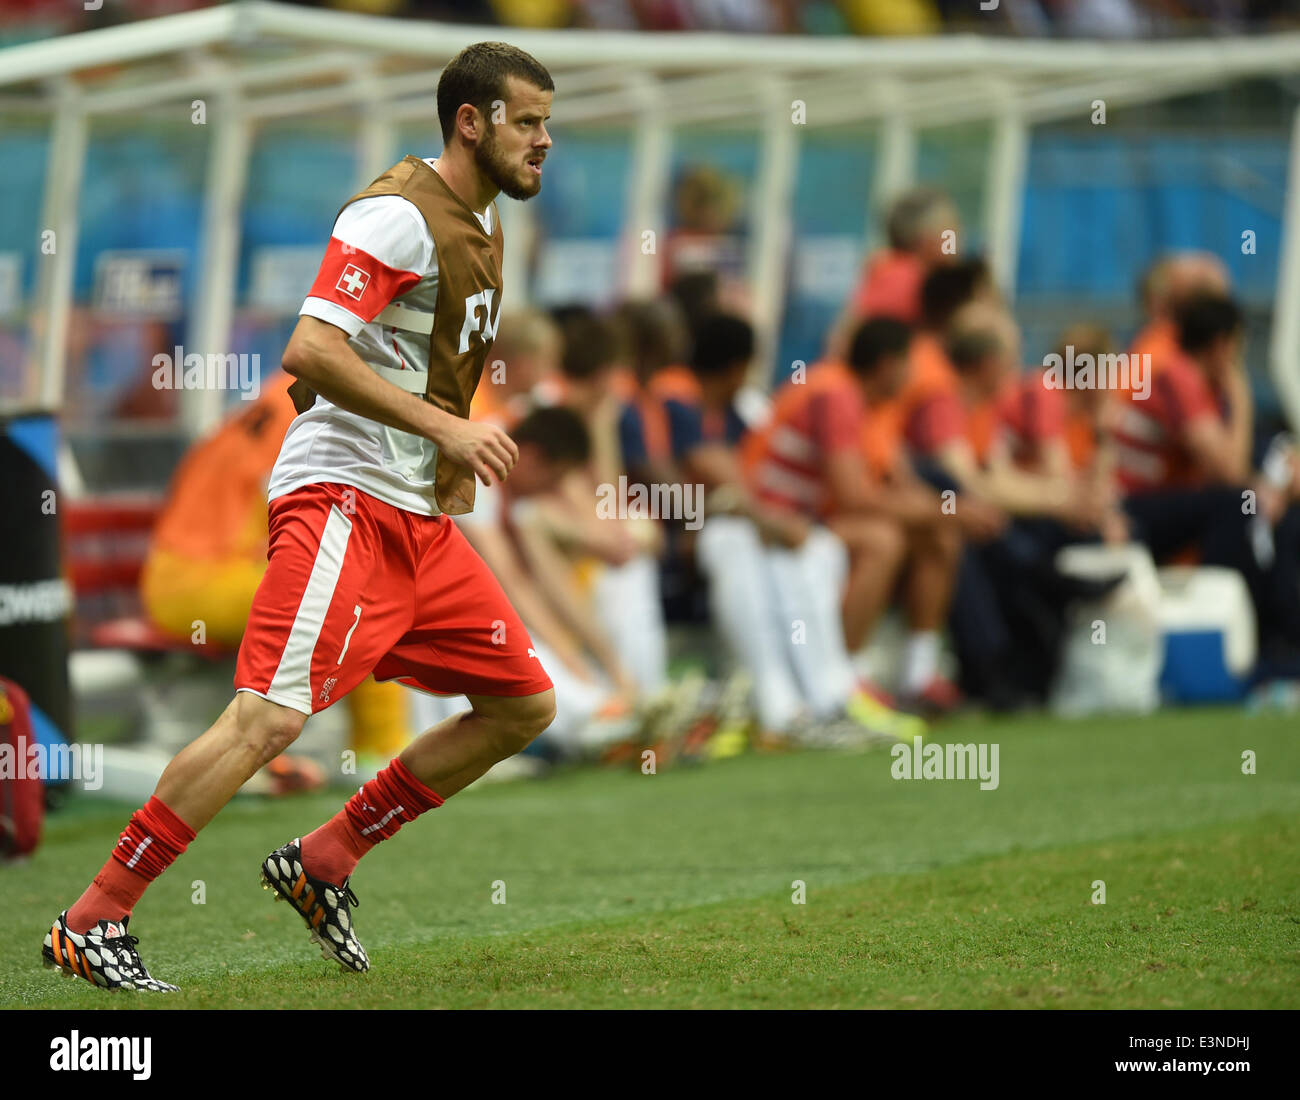 Switzerland's Tranquillo Barnetta warms up during the FIFA World Cup 2014 group E preliminary round match between Switzerland and France at the Arena Fonte Nova Stadium in Salvador da Bahia, Brazil, 20 June 2014. Photo: Marius Becker/dpa Stock Photo